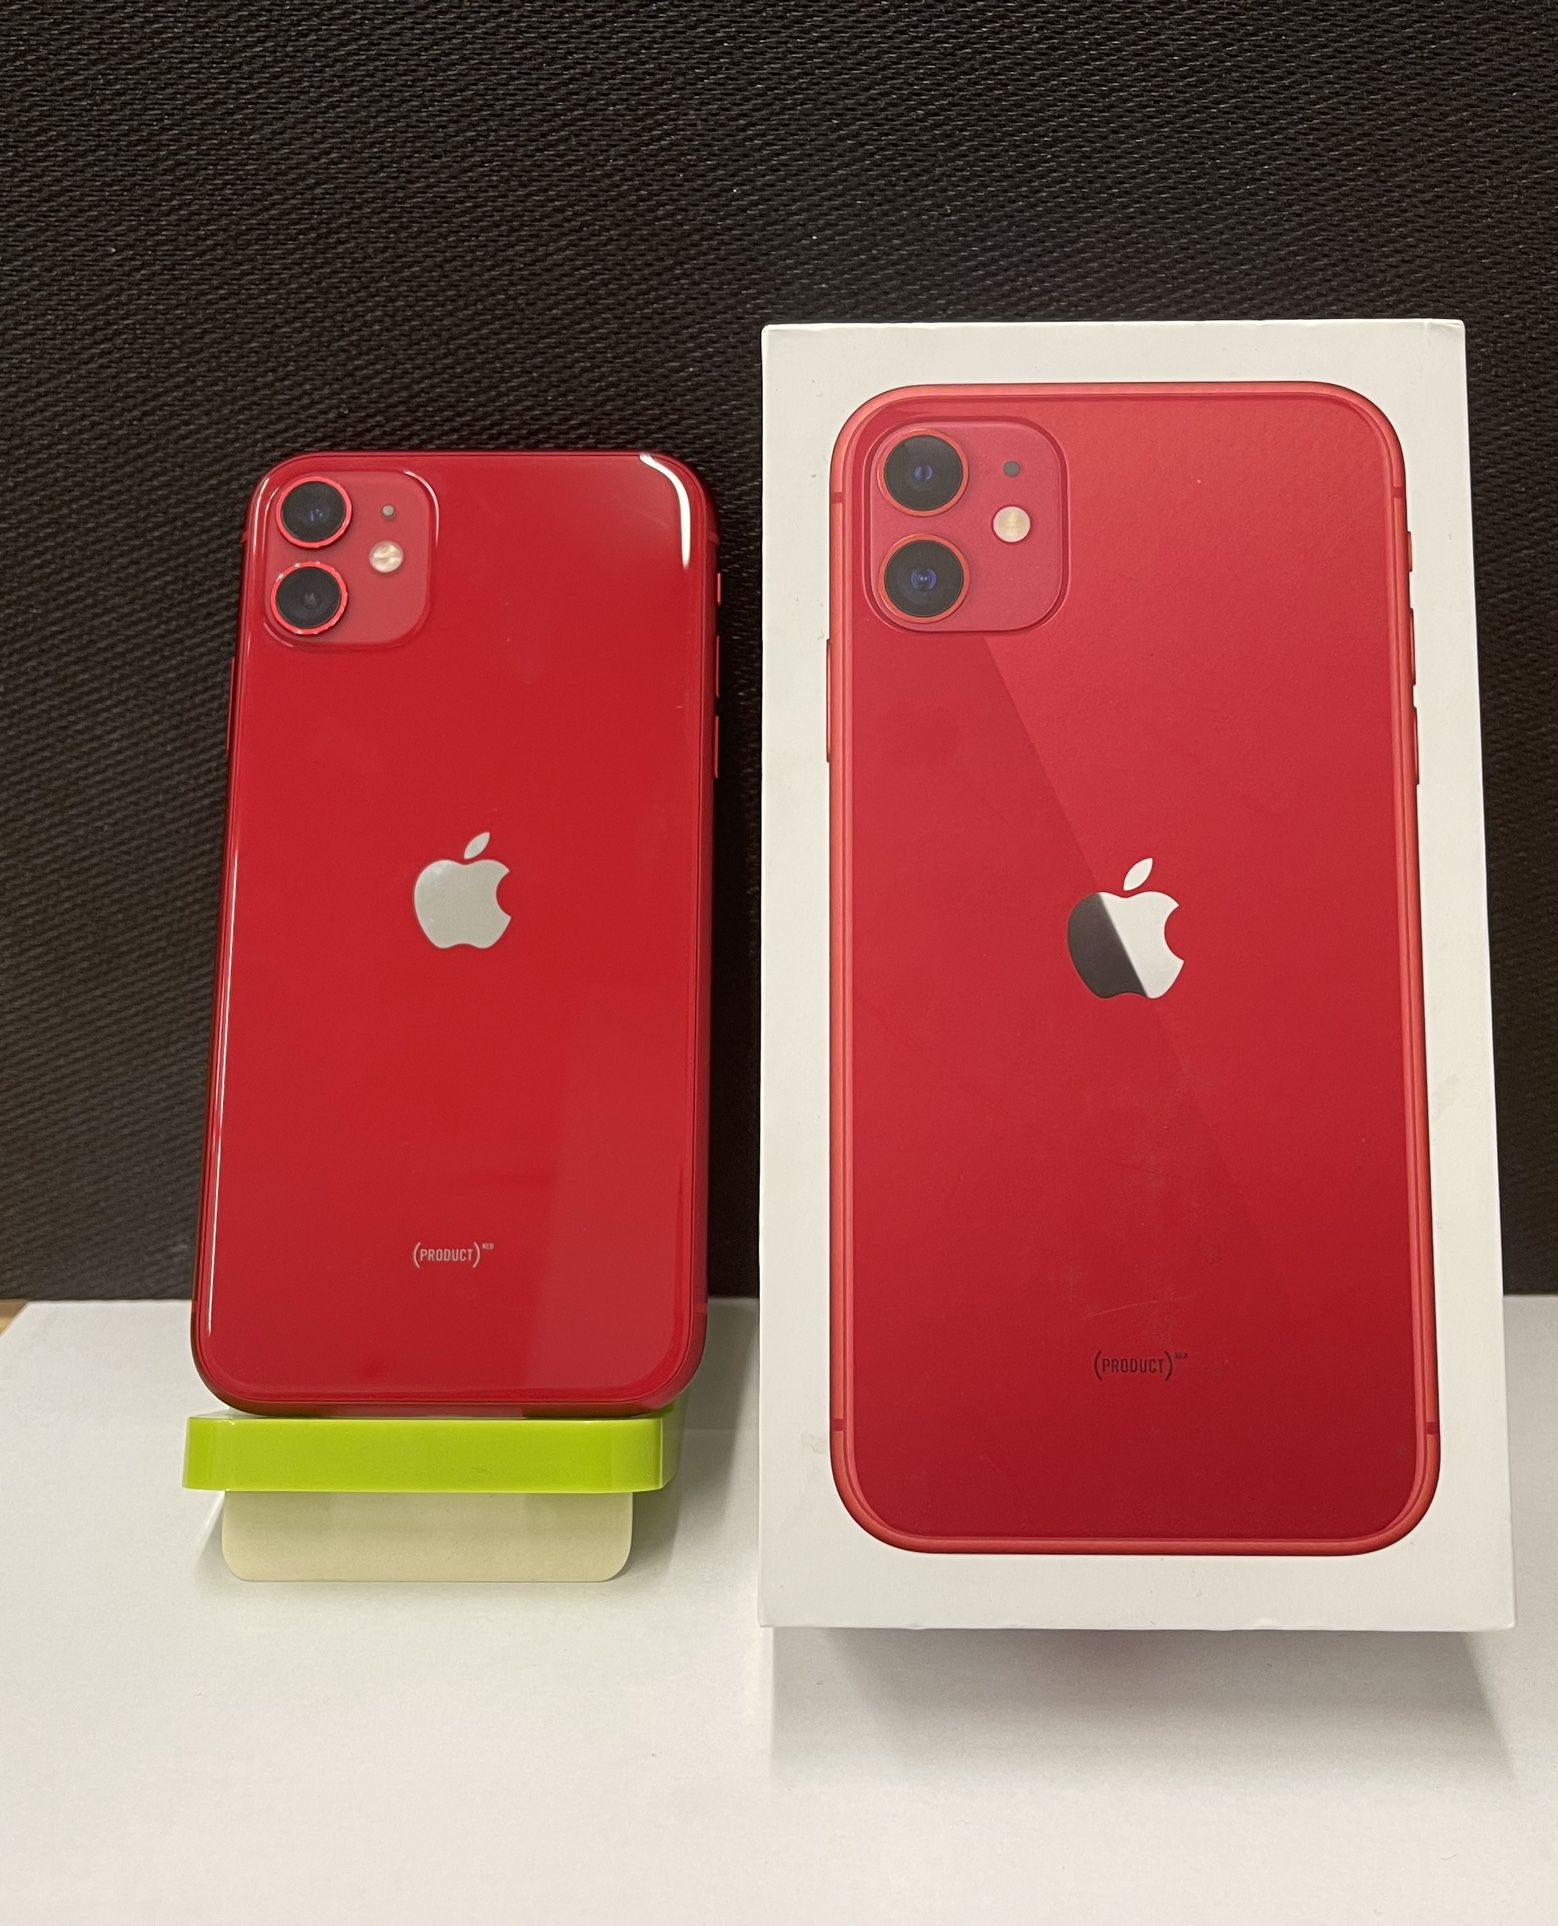 Apple iPhone 11 128GB Unlocked (Product RED) for Sale in New